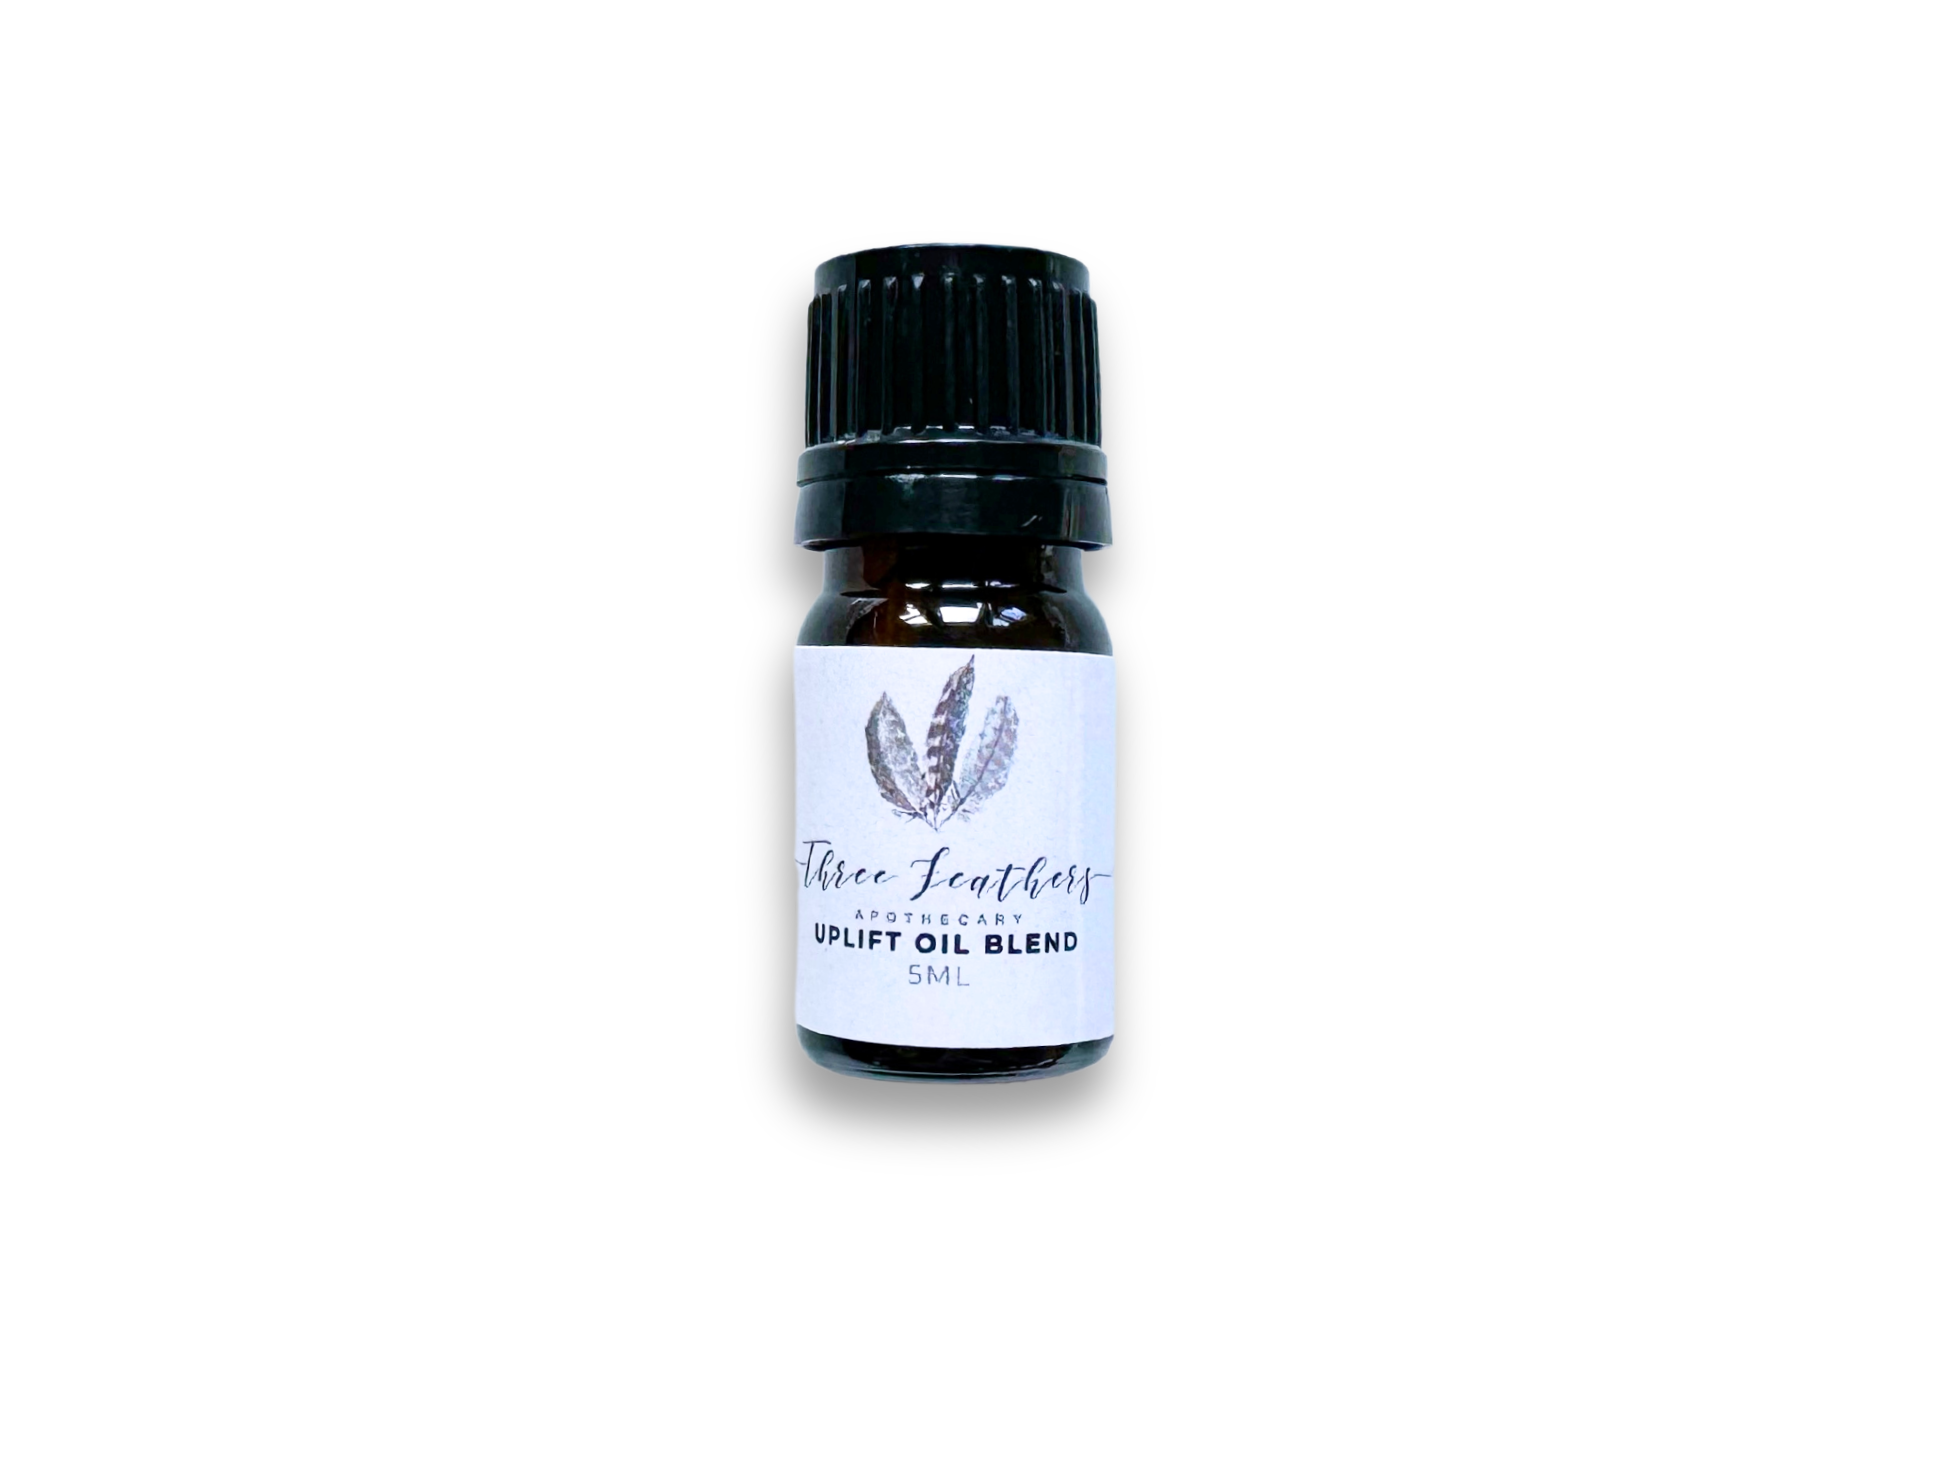 Uplift Oil Blend || Three Feathers Apothecary